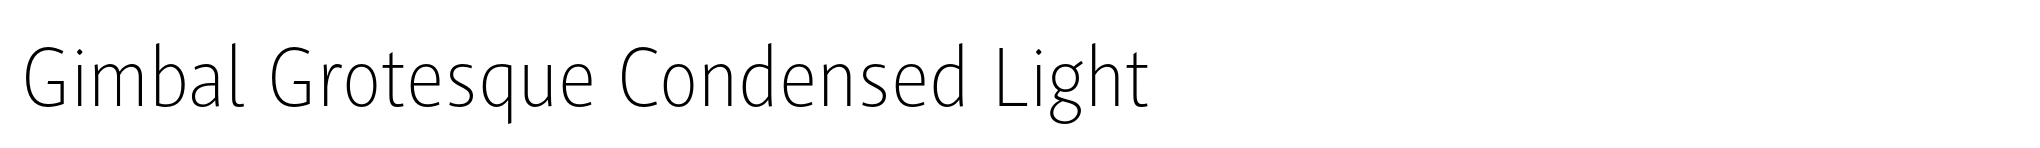 Gimbal Grotesque Condensed Light image